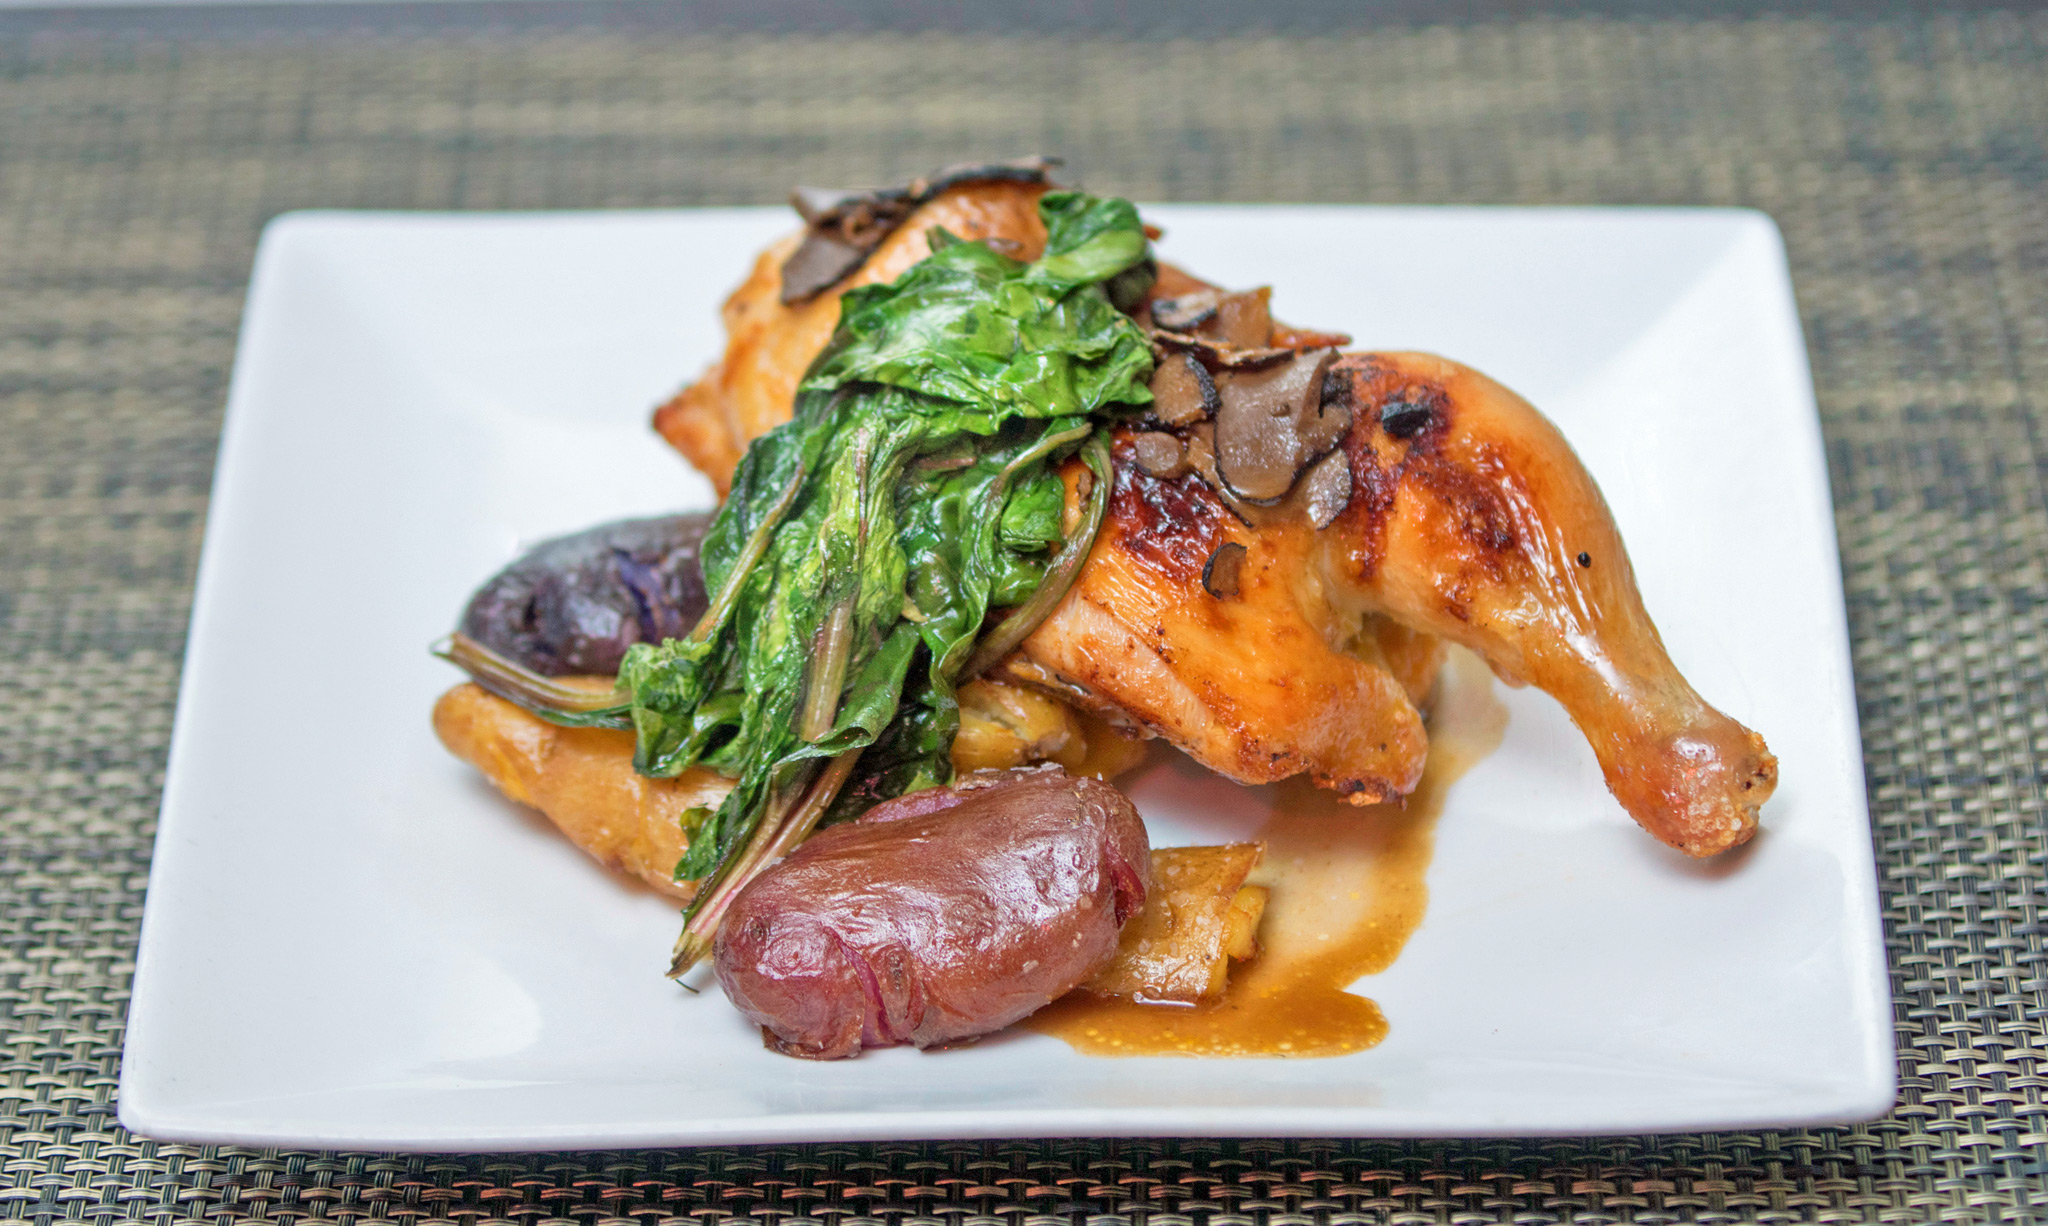 Butter and Thyme Roasted ½ Chicken - crispy fingerlings, sauté greens, truffle au jus